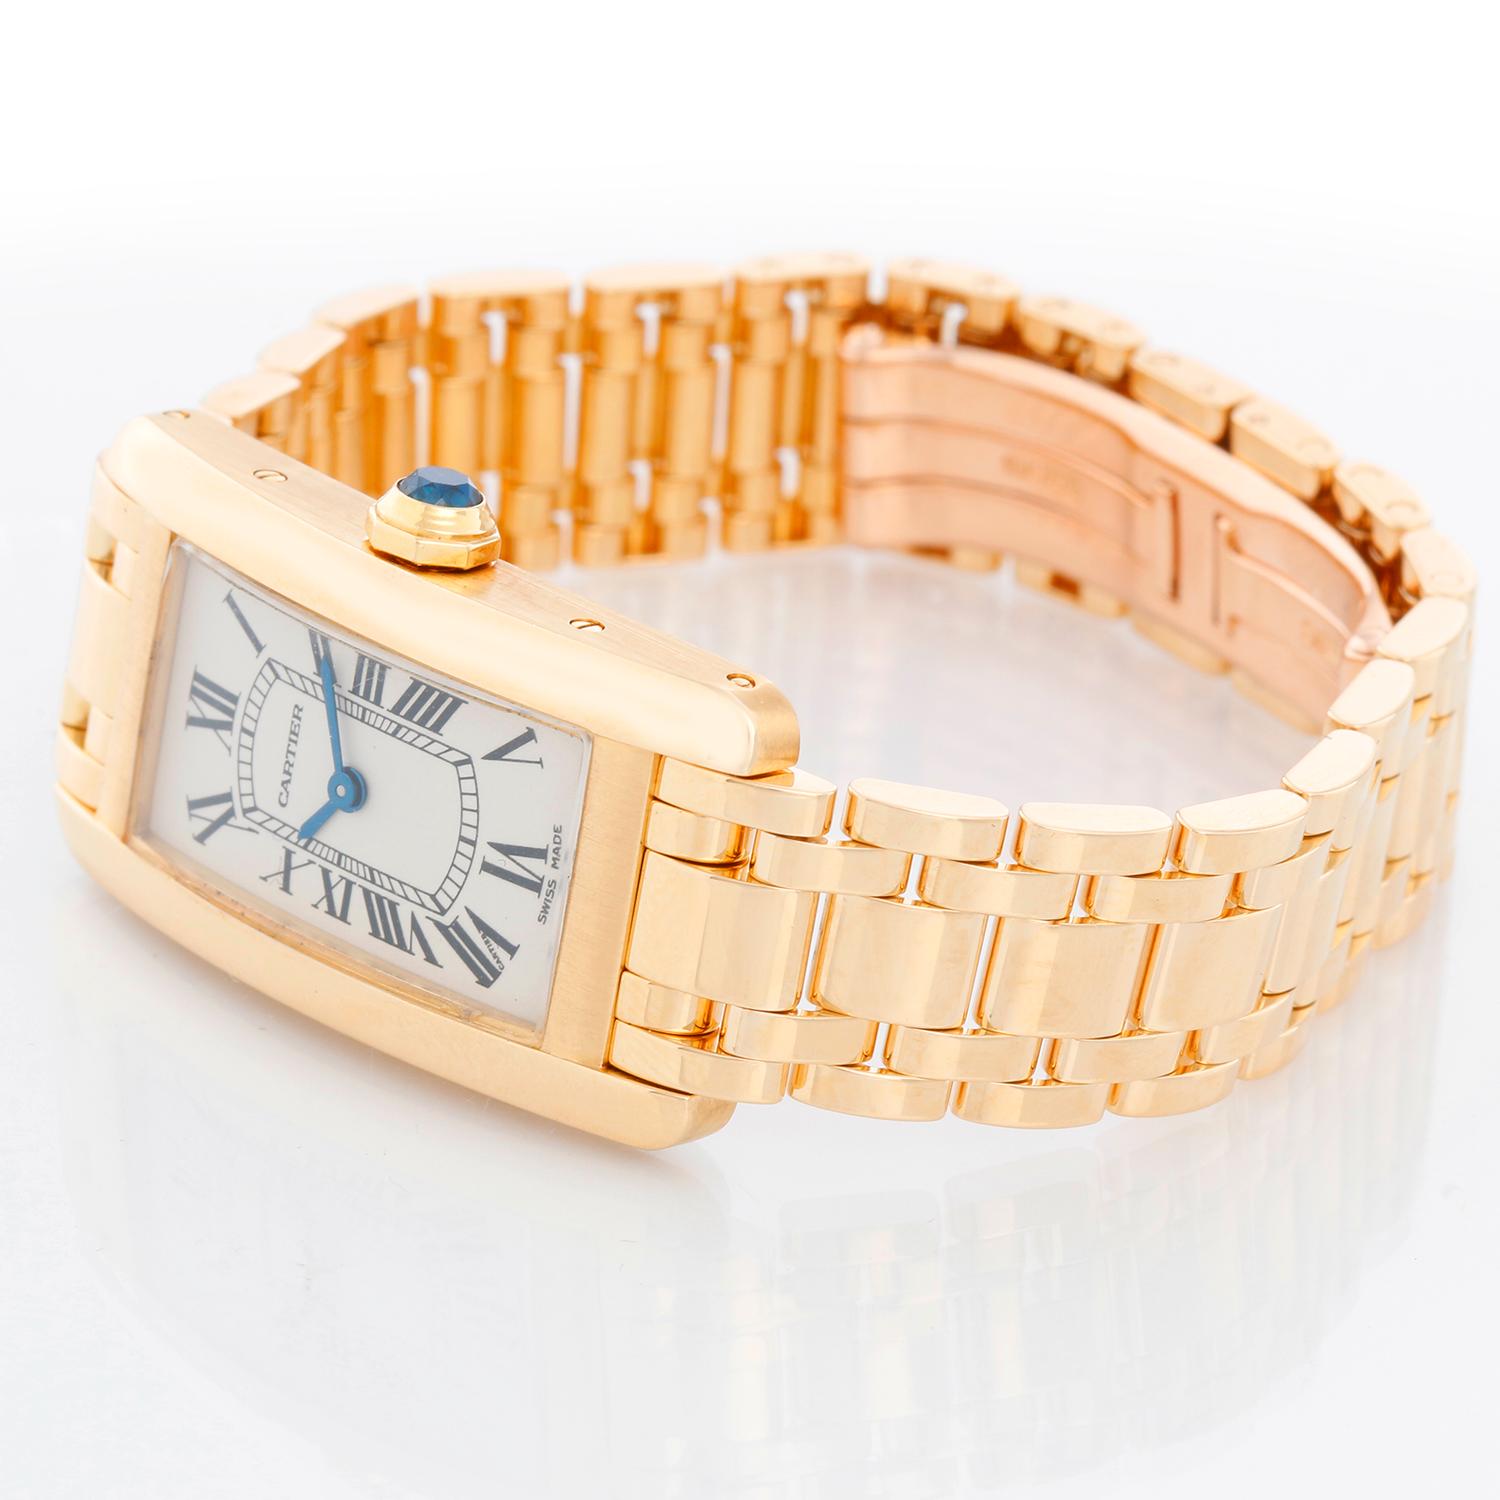 Cartier Tank Americaine Ladies 18k Yellow Gold Watch 2482 - Quartz. 18k yellow gold case (19mm x 35mm). Ivory colored dial with black Roman numerals. 18K yellow gold Cartier bracelet; will fit a 6 inch wrist . Pre-owned with Cartier box.